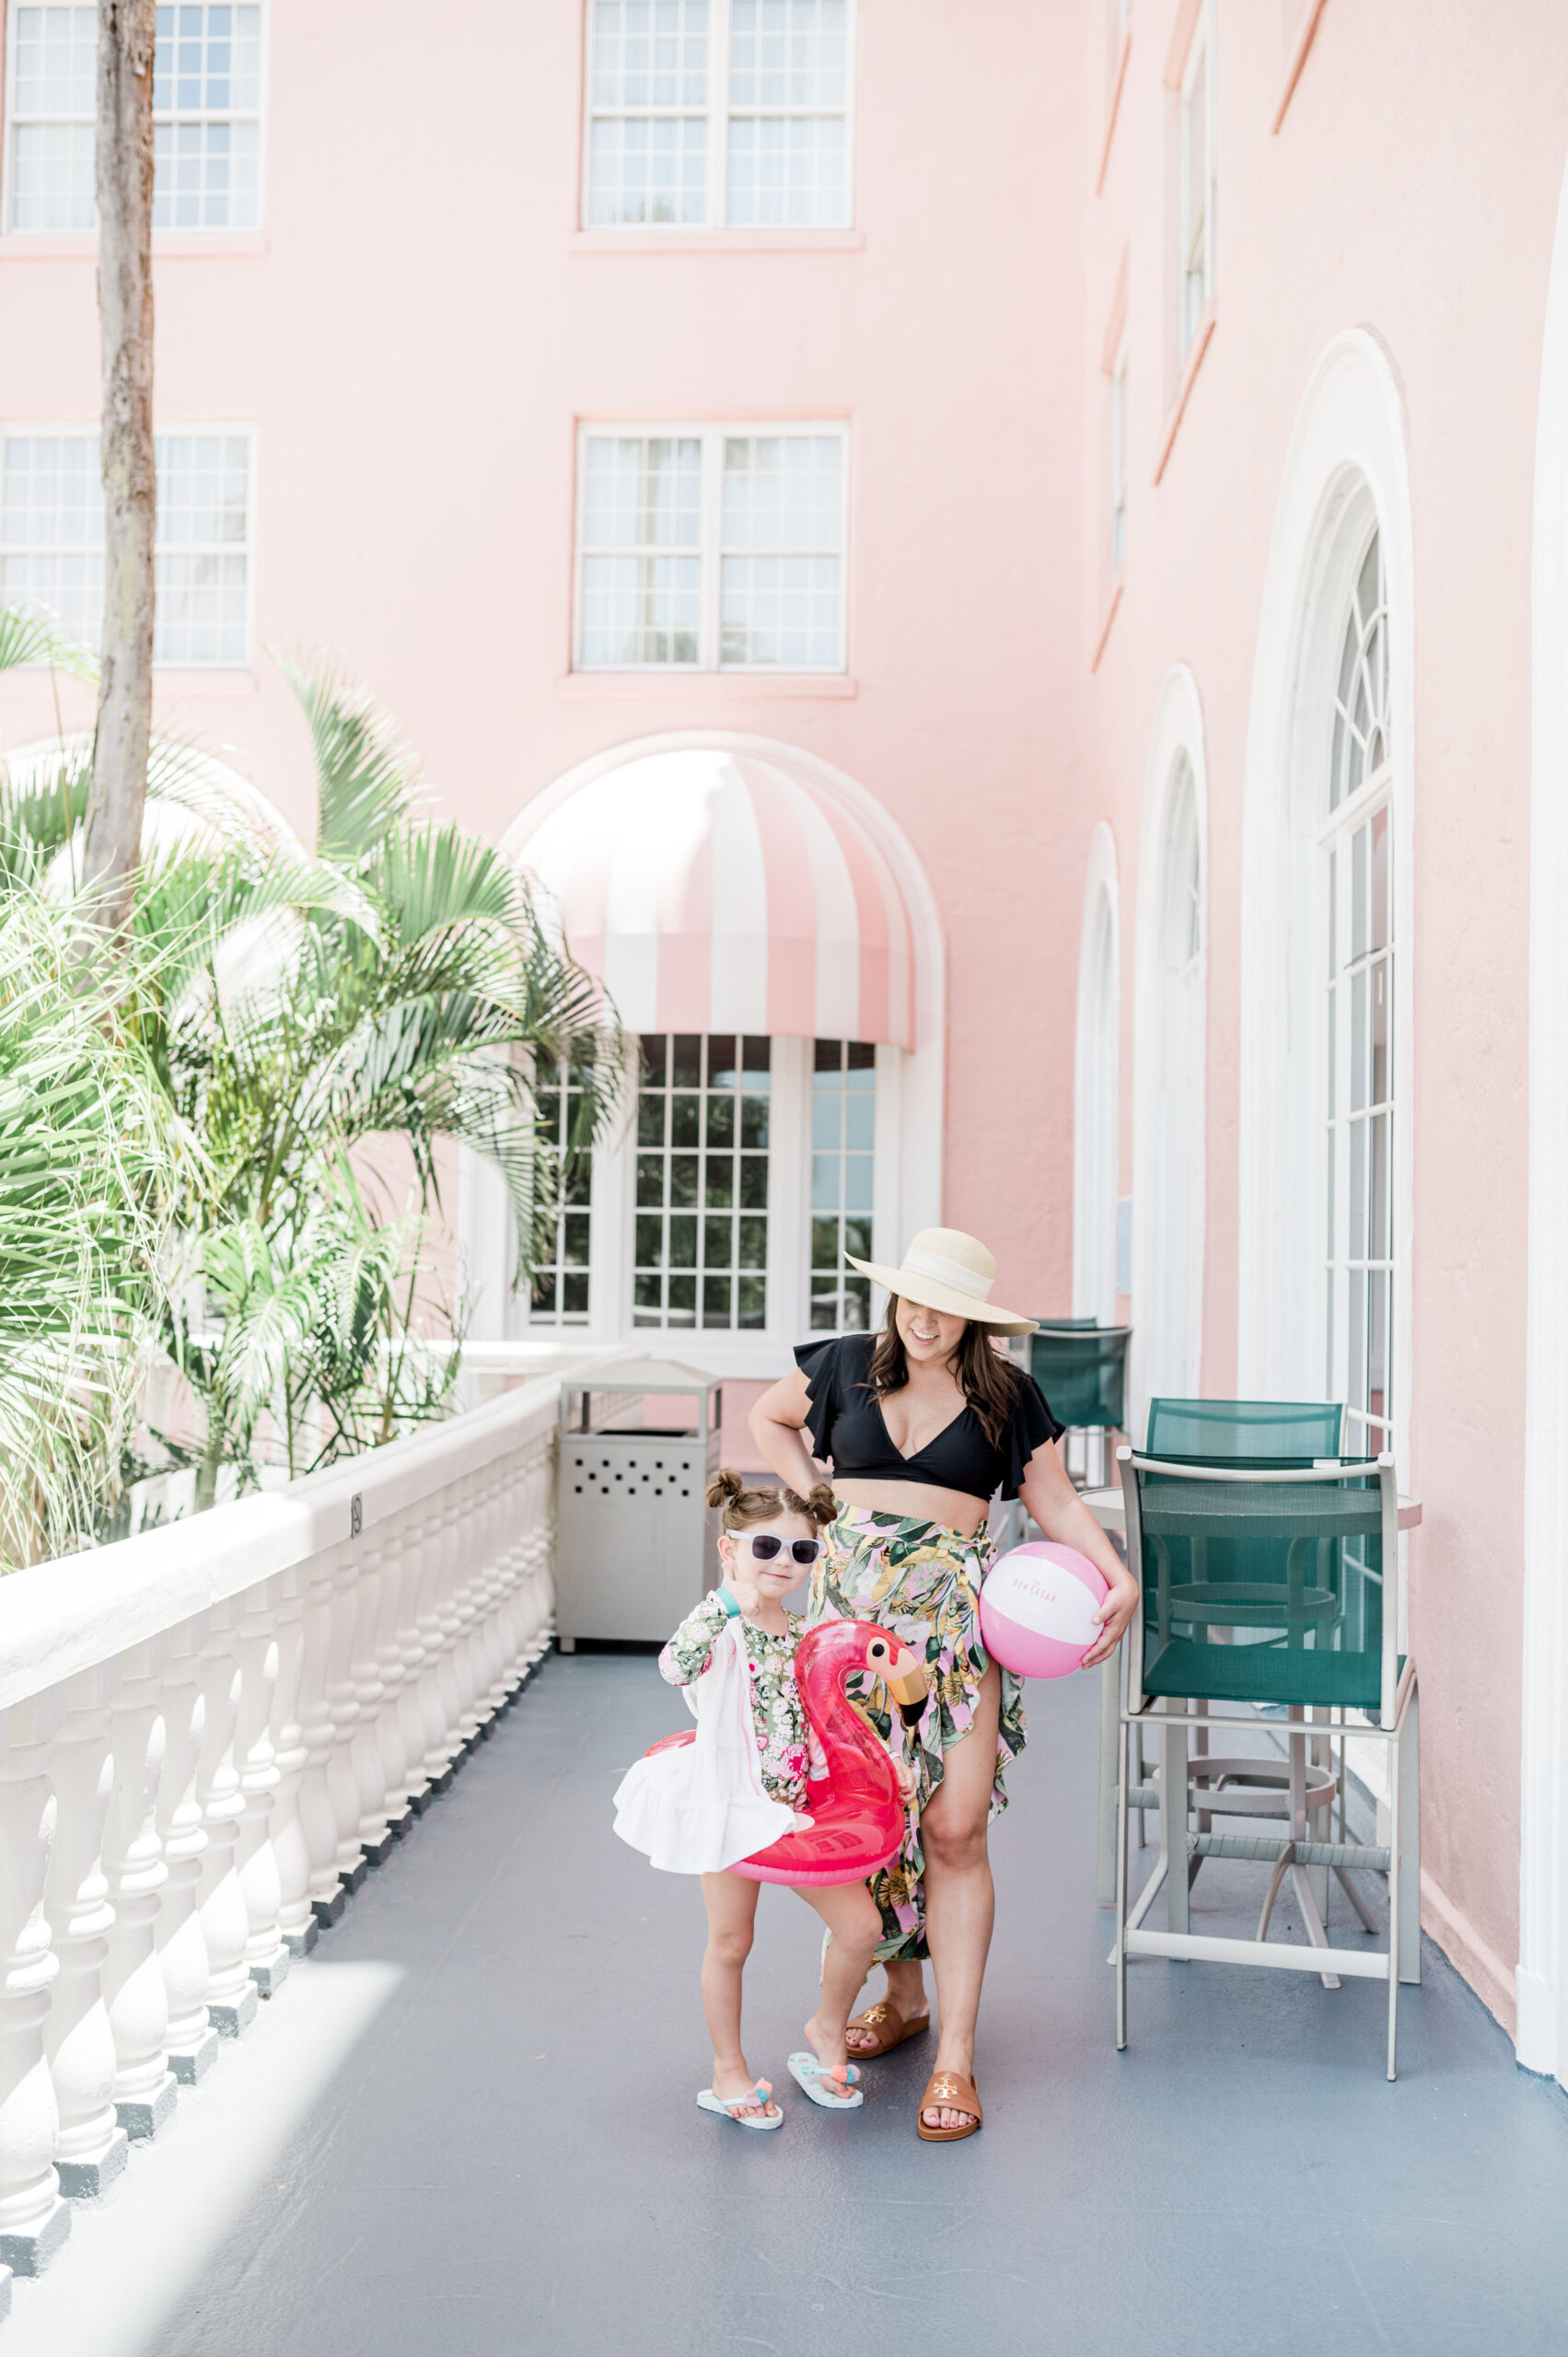 Brittney Naylor looking at daughter. Both are in swimwear. Brittney is holding a beach ball while her daughter had a pink flamingo float around her waist. Her daughter is holding up a thumbs up as Brittney looks on. Both are standing on Balcony at the Pink Palace Instagrammable hotel in Florida